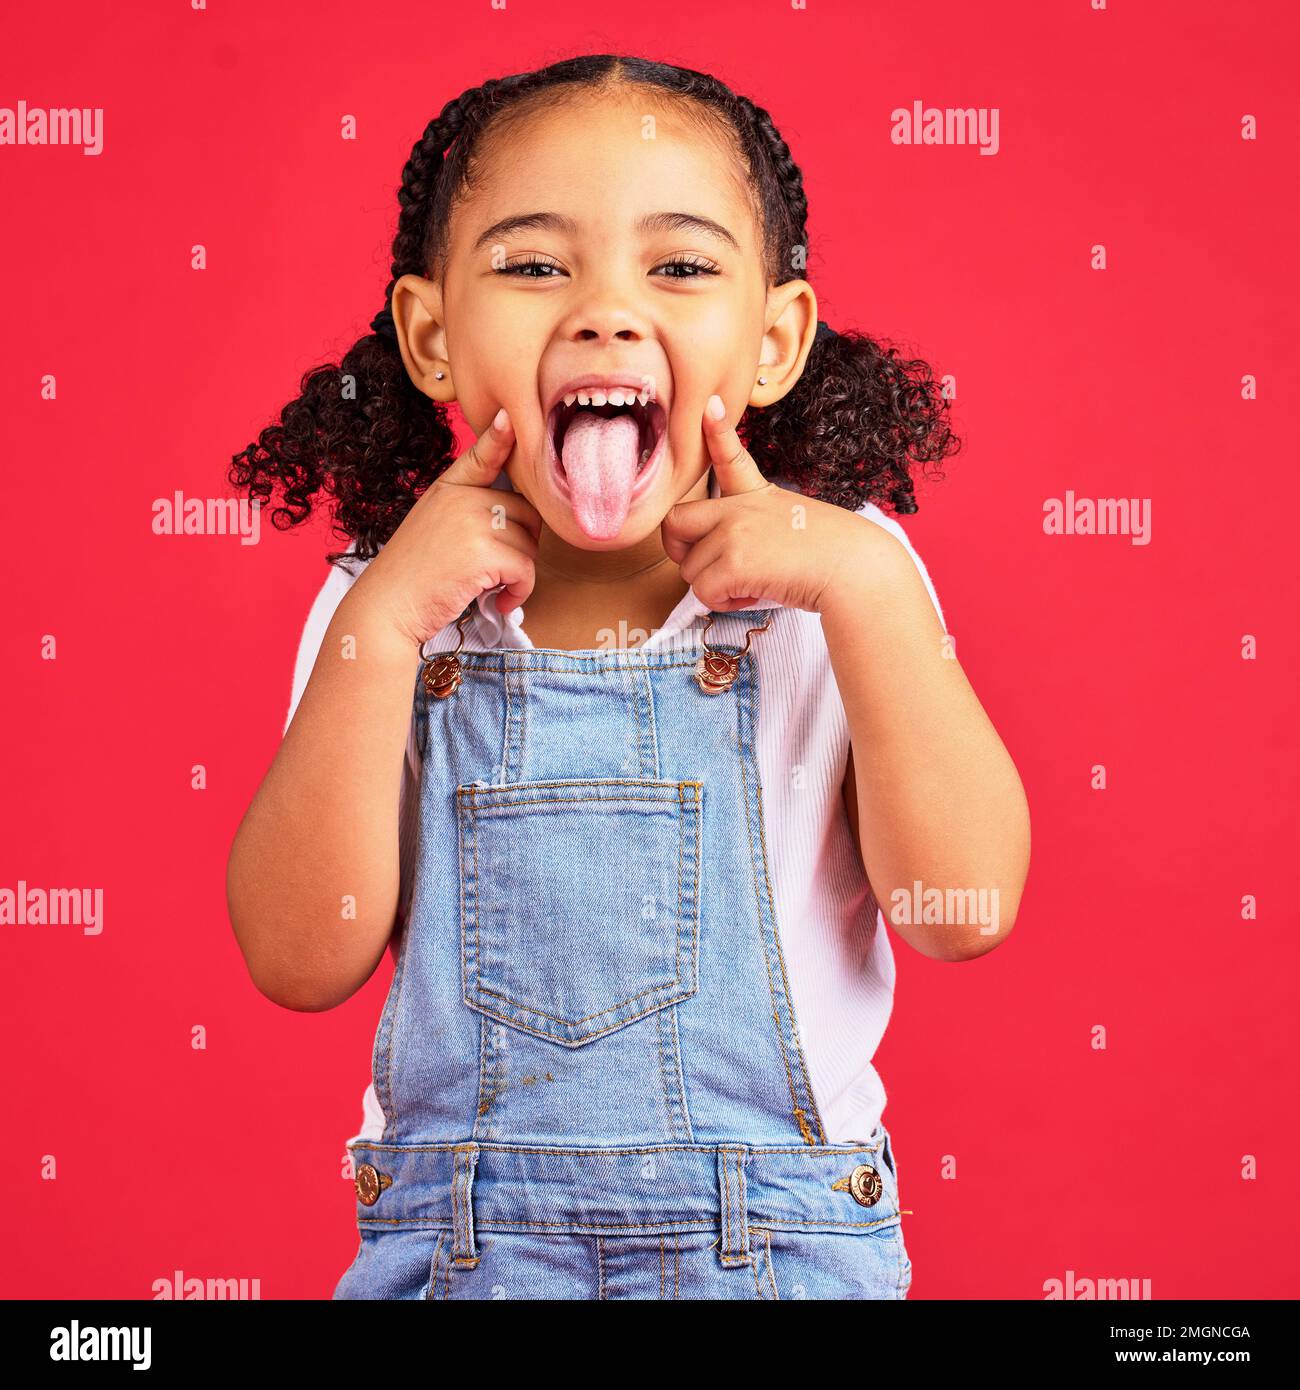 Little girl, portrait and tongue out on isolated red background in goofy, silly games and playful facial expression. Happy, kid and child with funny Stock Photo